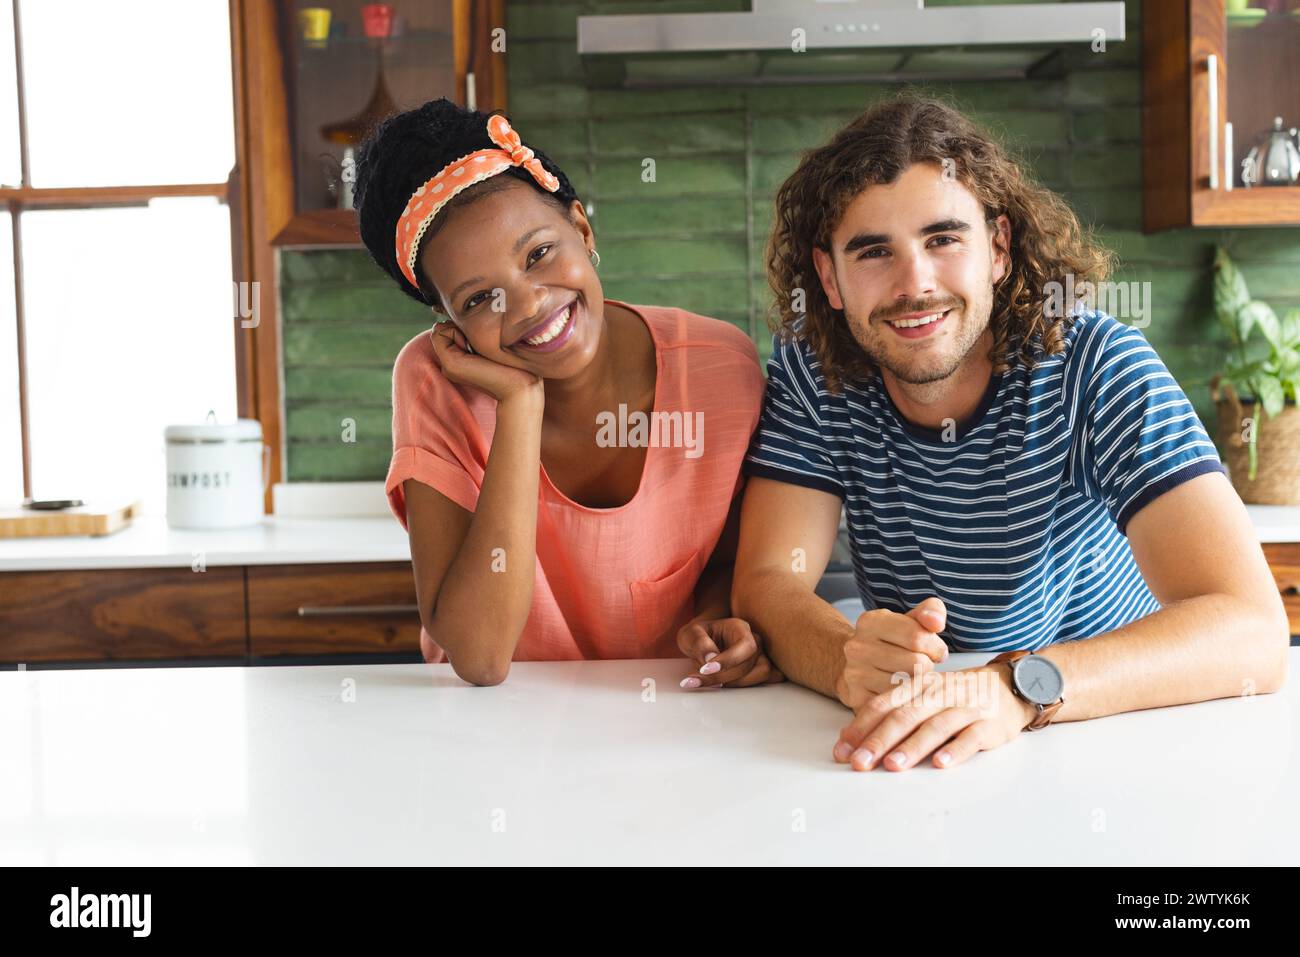 A diverse couple shares a joyful moment in the kitchen at home Stock Photo